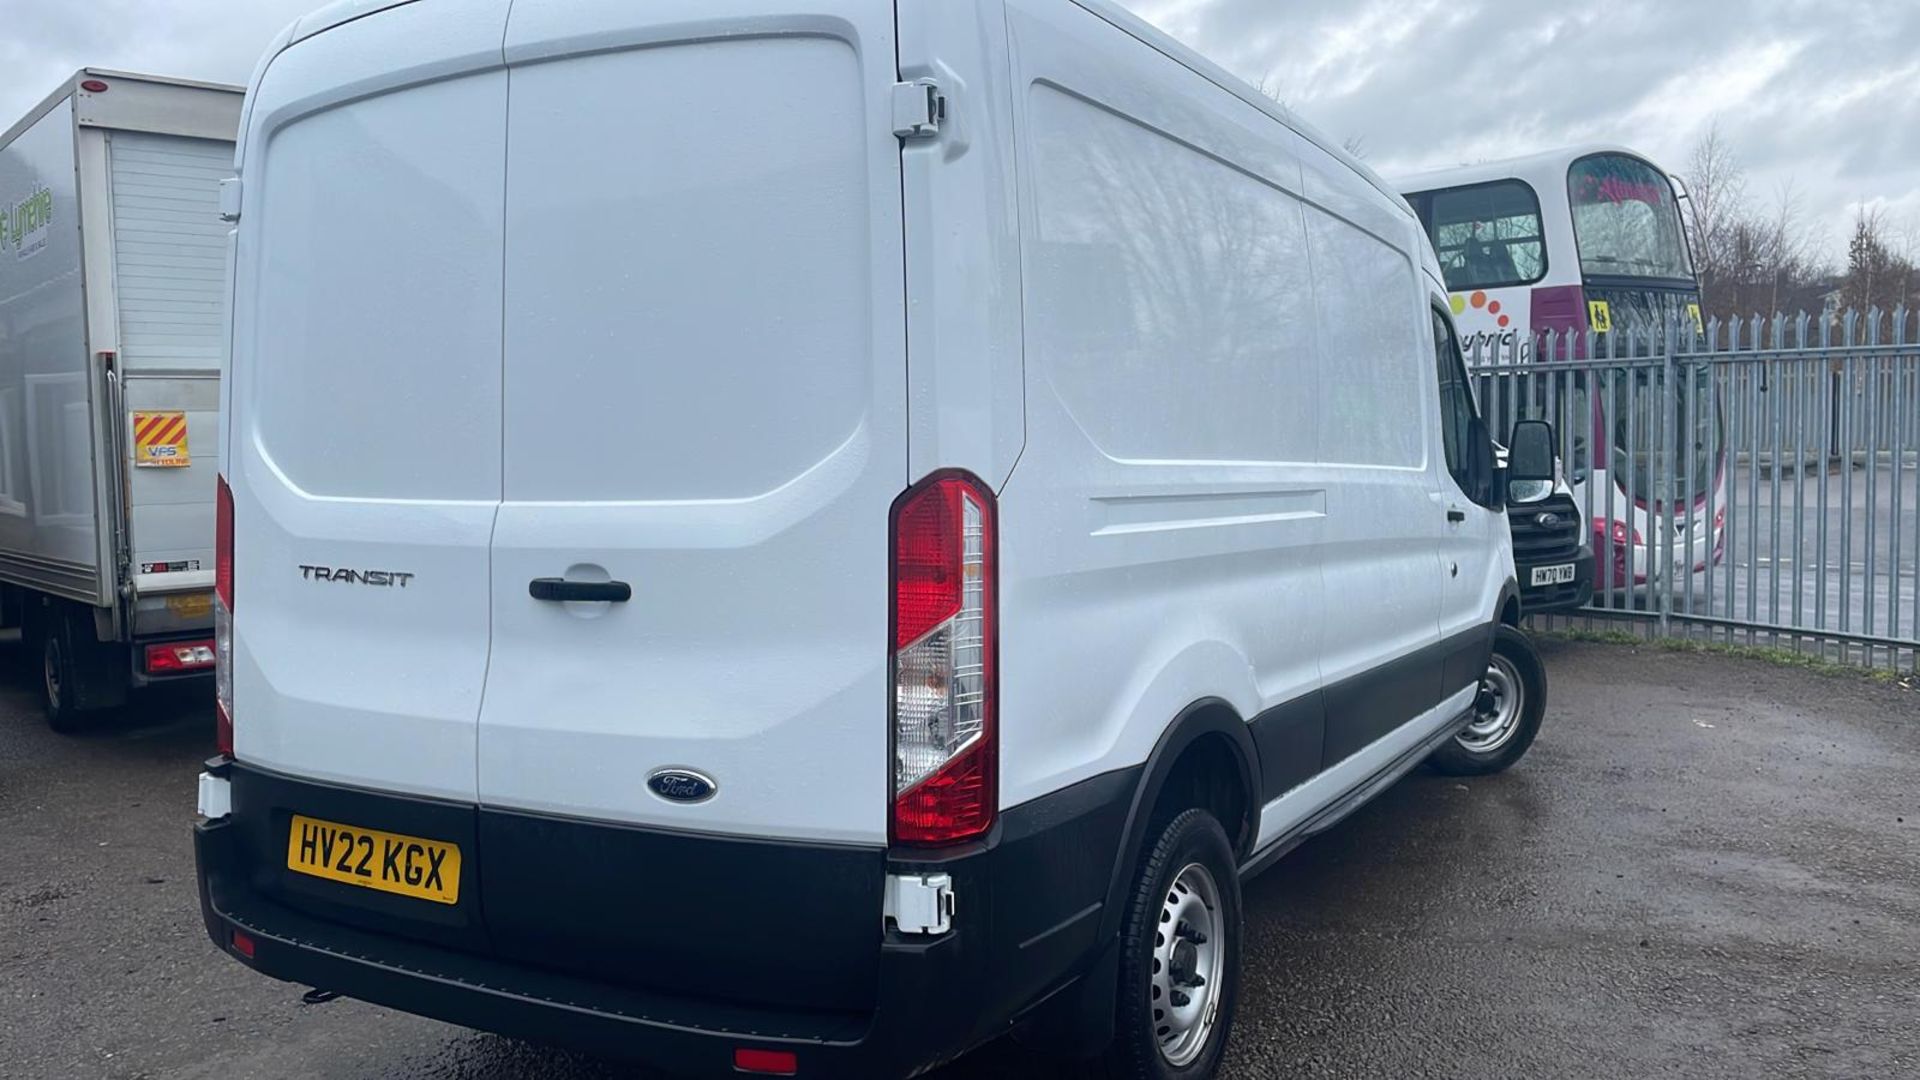 2022 22 PLATE FORD TRANSIT 350 LEADER ECO BLUE PANEL VAN - 24,186 WARRANTED MILES - FWD. - Image 4 of 9